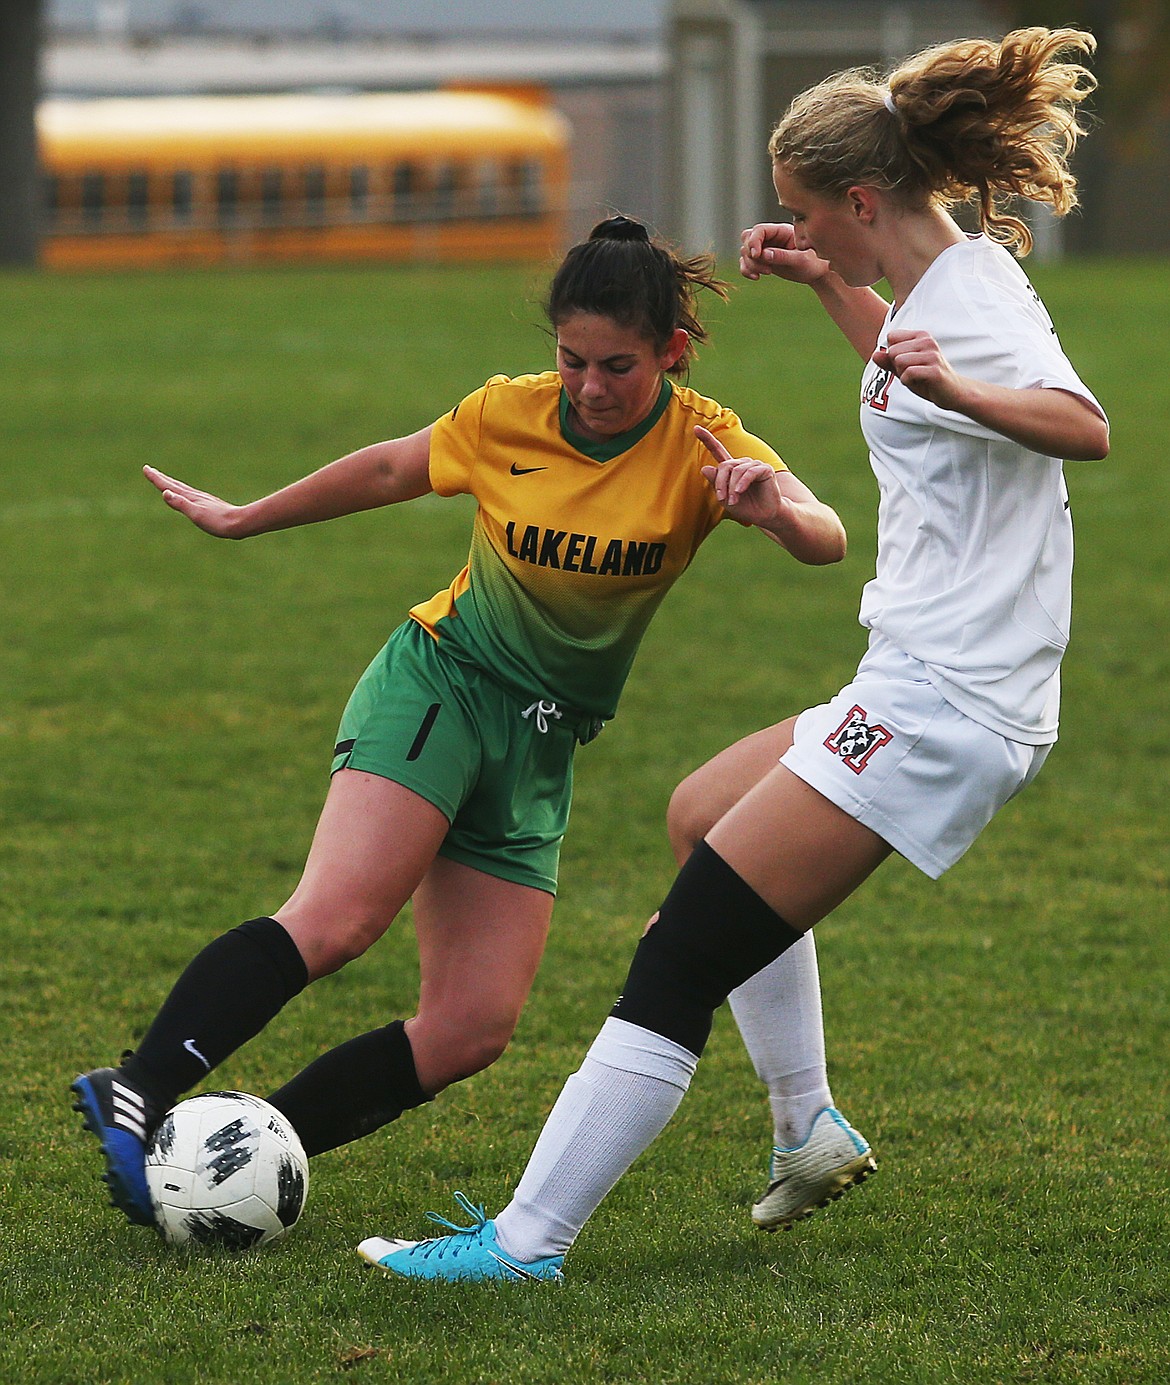 Lakeland&#146;s Makayla Higbee dribbles the ball around Moscow defender Serena Strawn in Tuesday&#146;s match at Sunrise Rotary Field in Rathdrum.